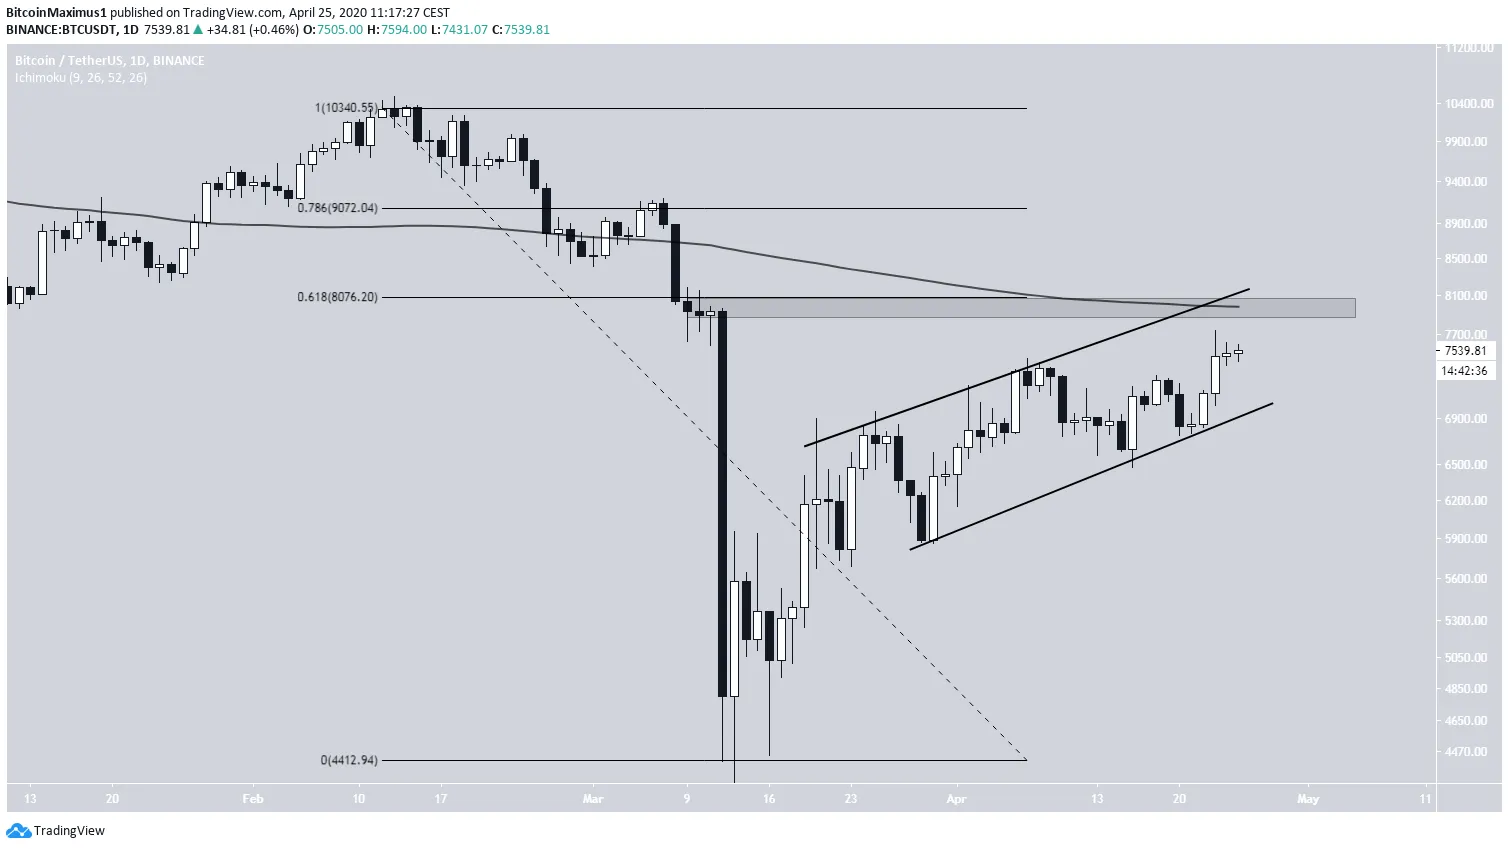 Bitcoin Ascending CHannel